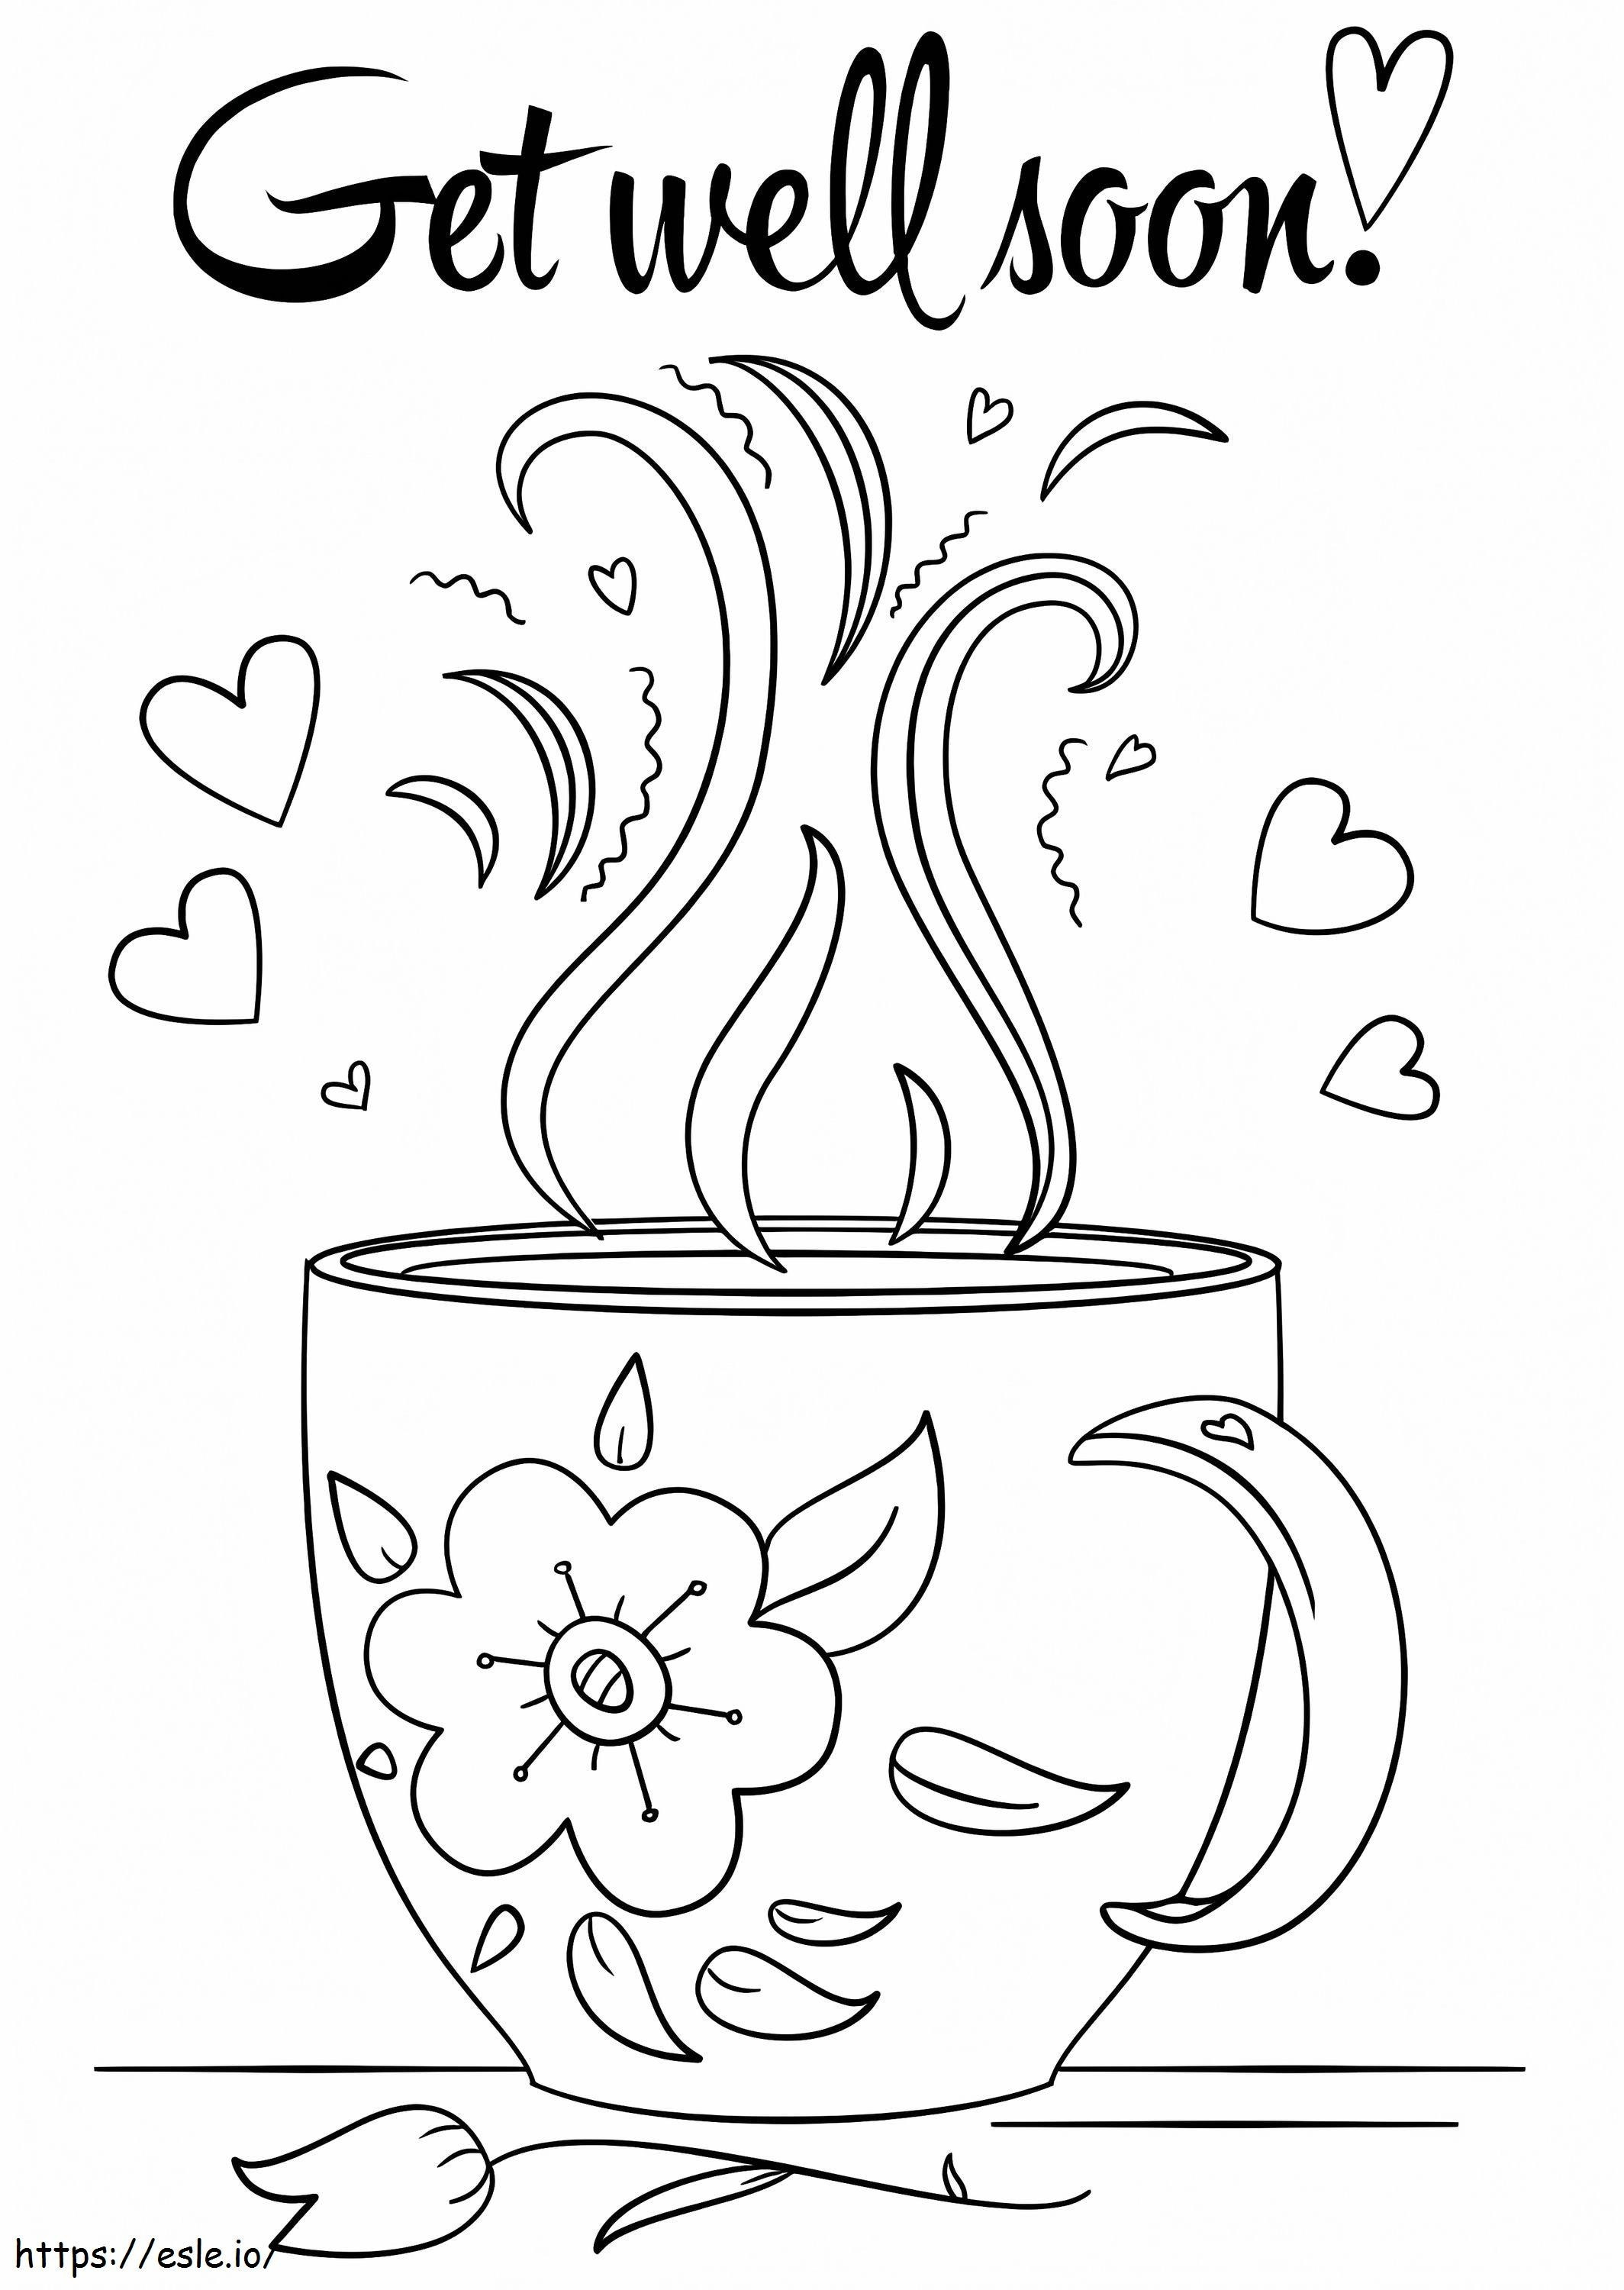 Get Well Soon Coloring Page 3 coloring page